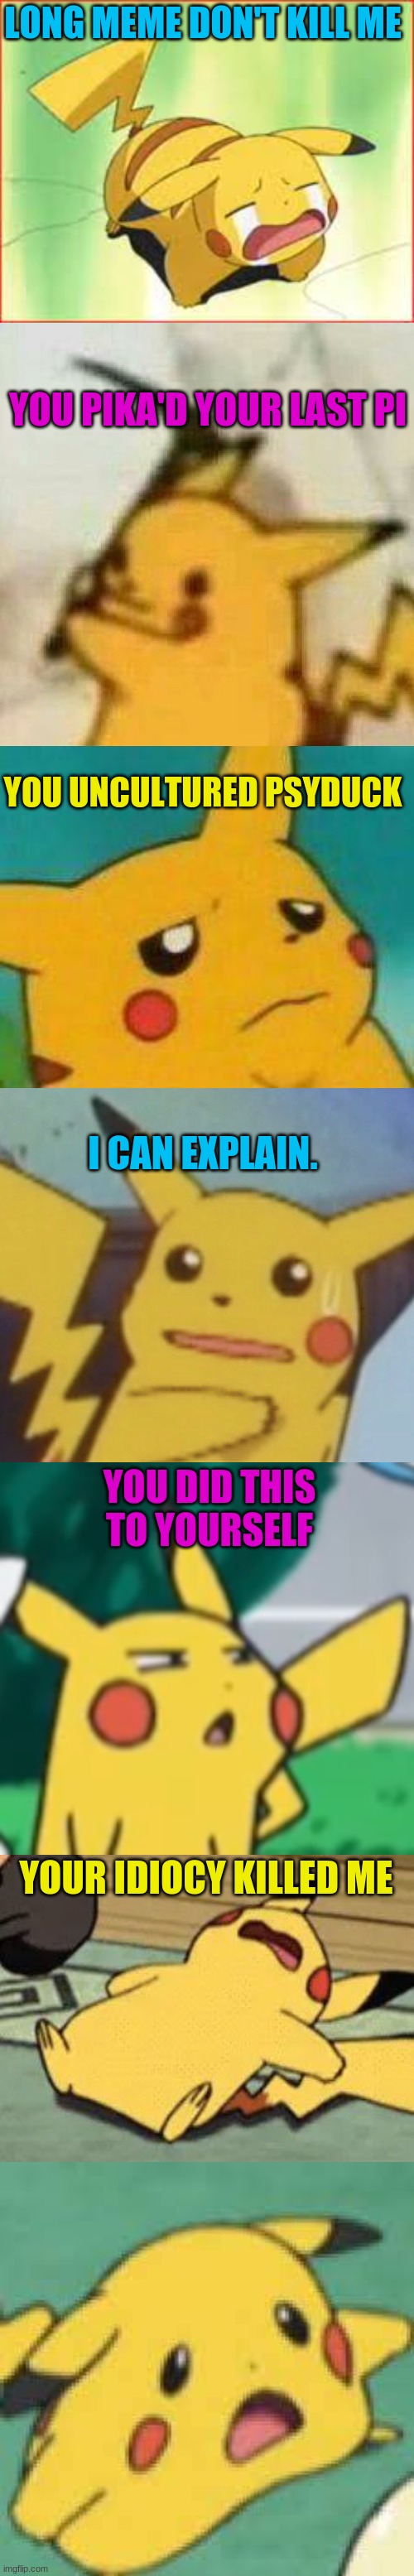 Pikachu long meme | LONG MEME DON'T KILL ME; YOU PIKA'D YOUR LAST PI; YOU UNCULTURED PSYDUCK; I CAN EXPLAIN. YOU DID THIS TO YOURSELF; YOUR IDIOCY KILLED ME | image tagged in long meme,pikachu | made w/ Imgflip meme maker